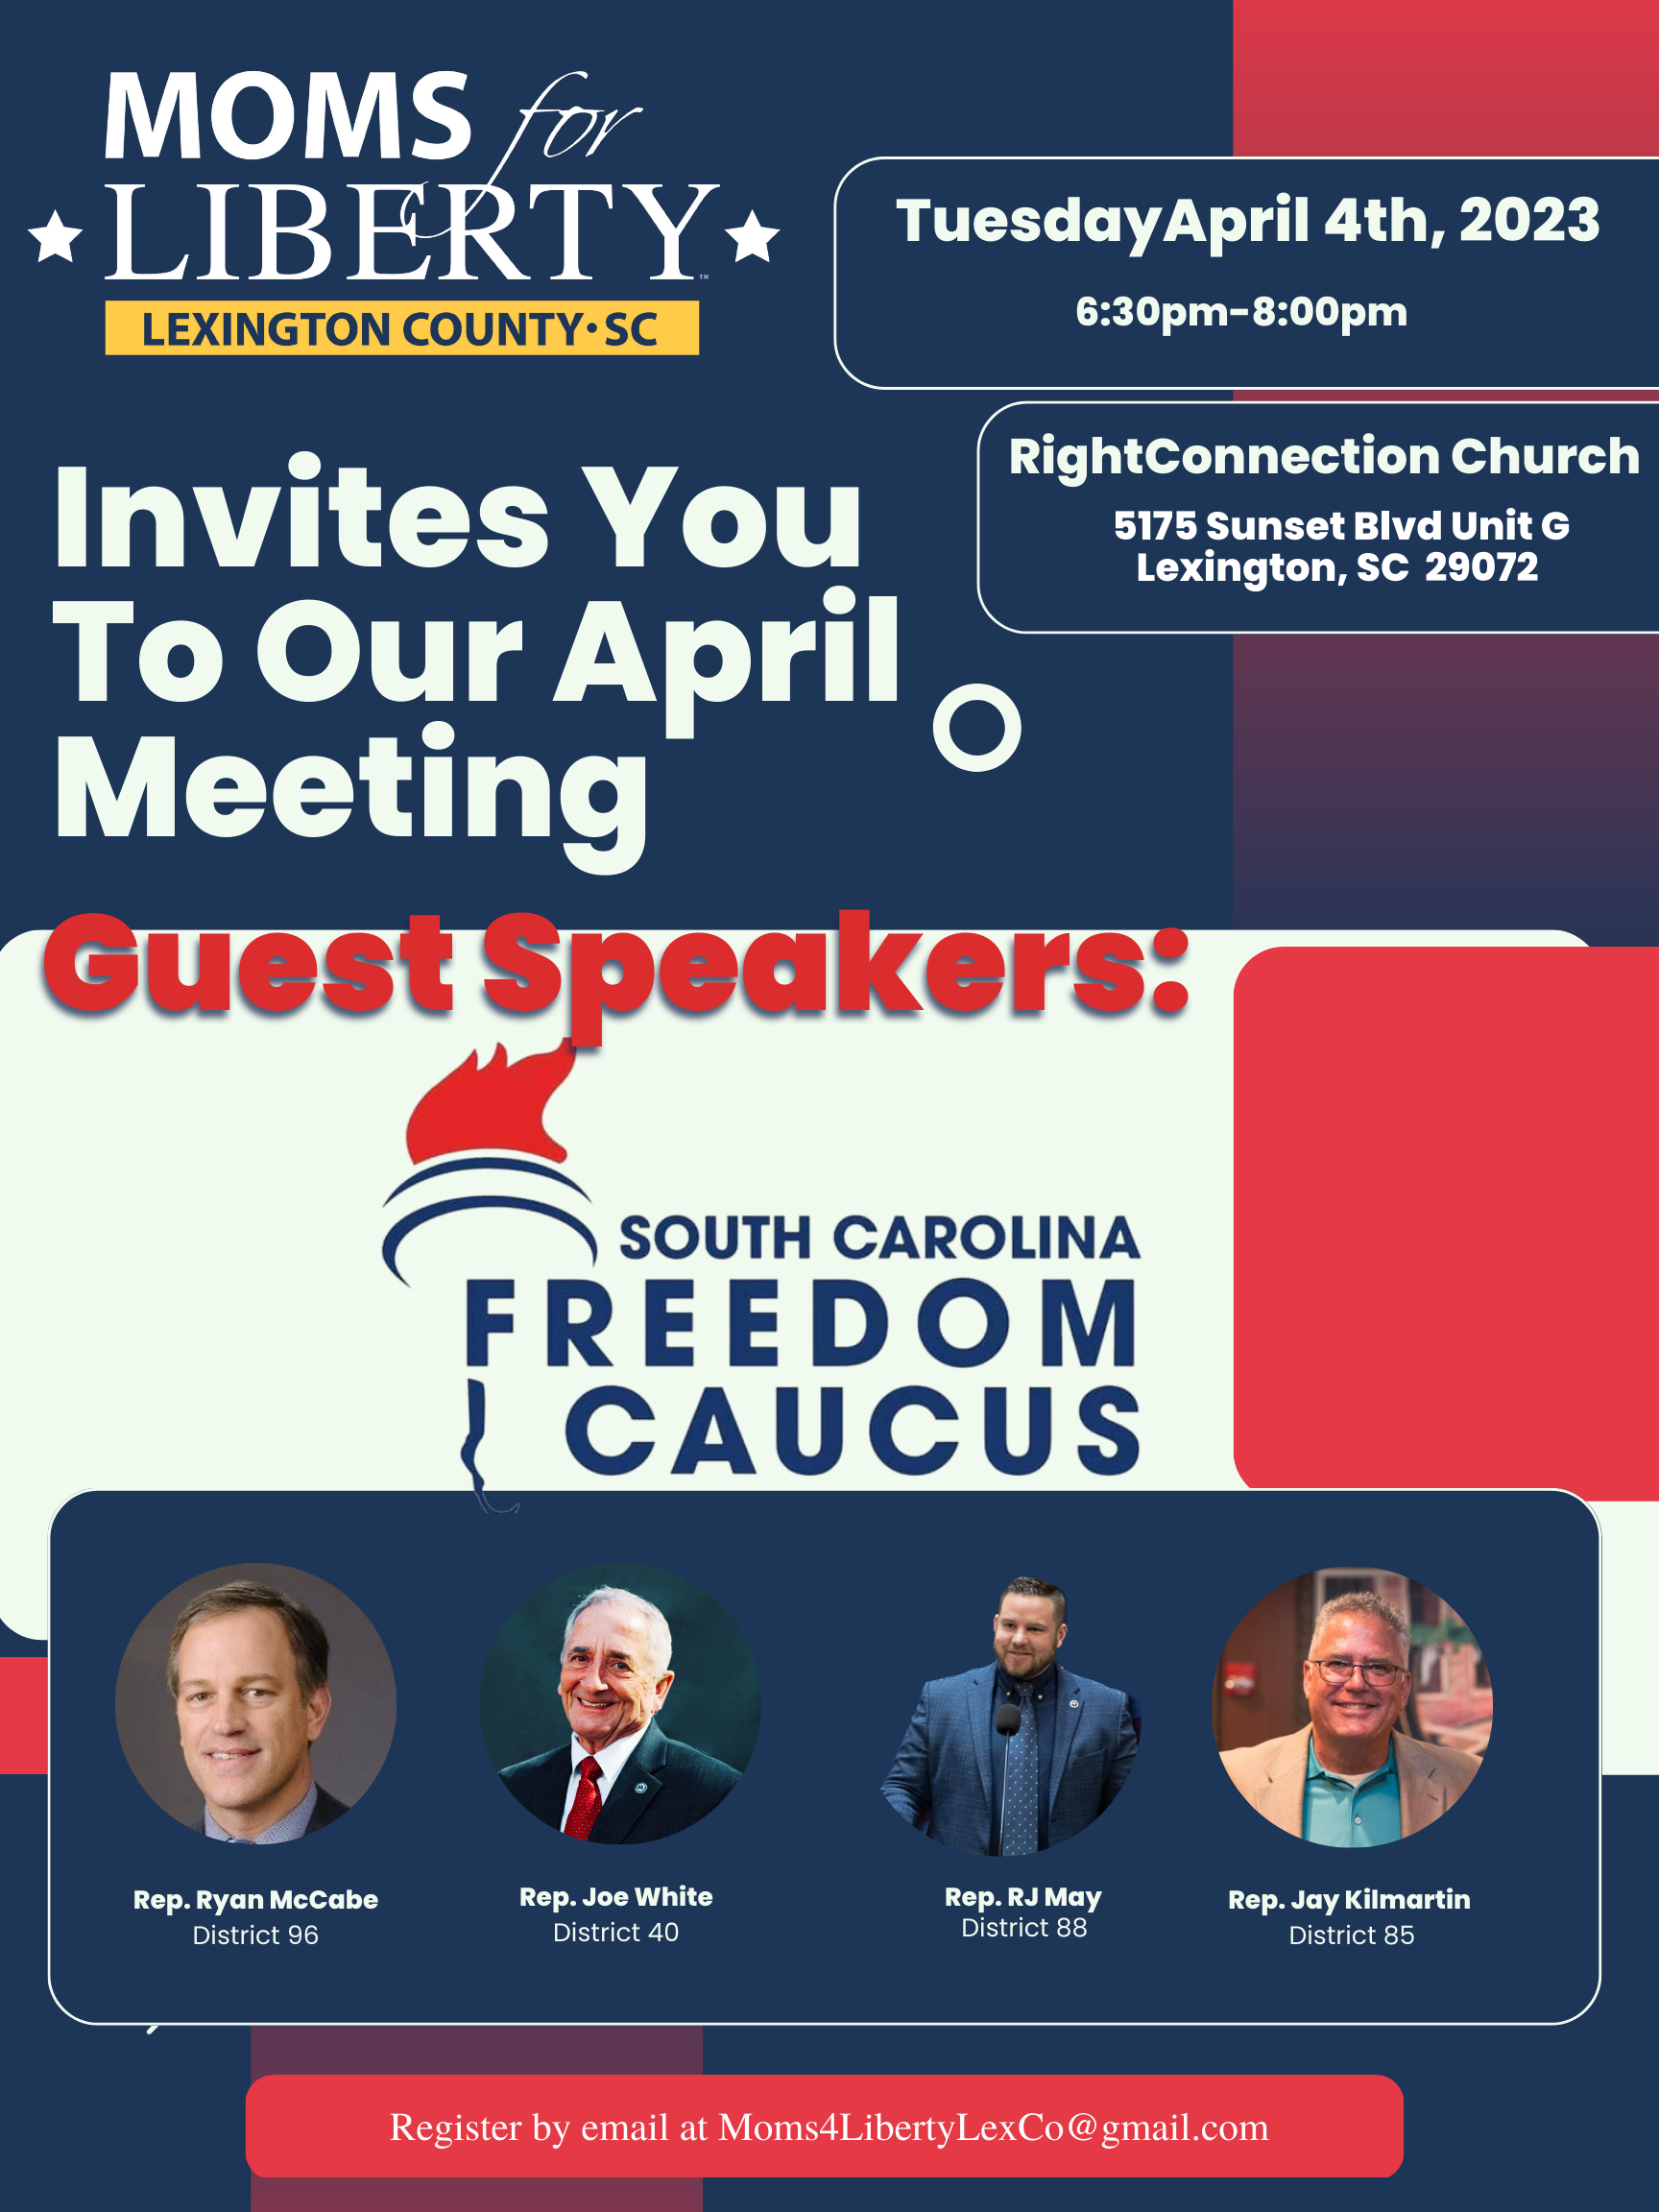 Chapter Meeting- Guest Speaker South Carolina Freedom Caucus